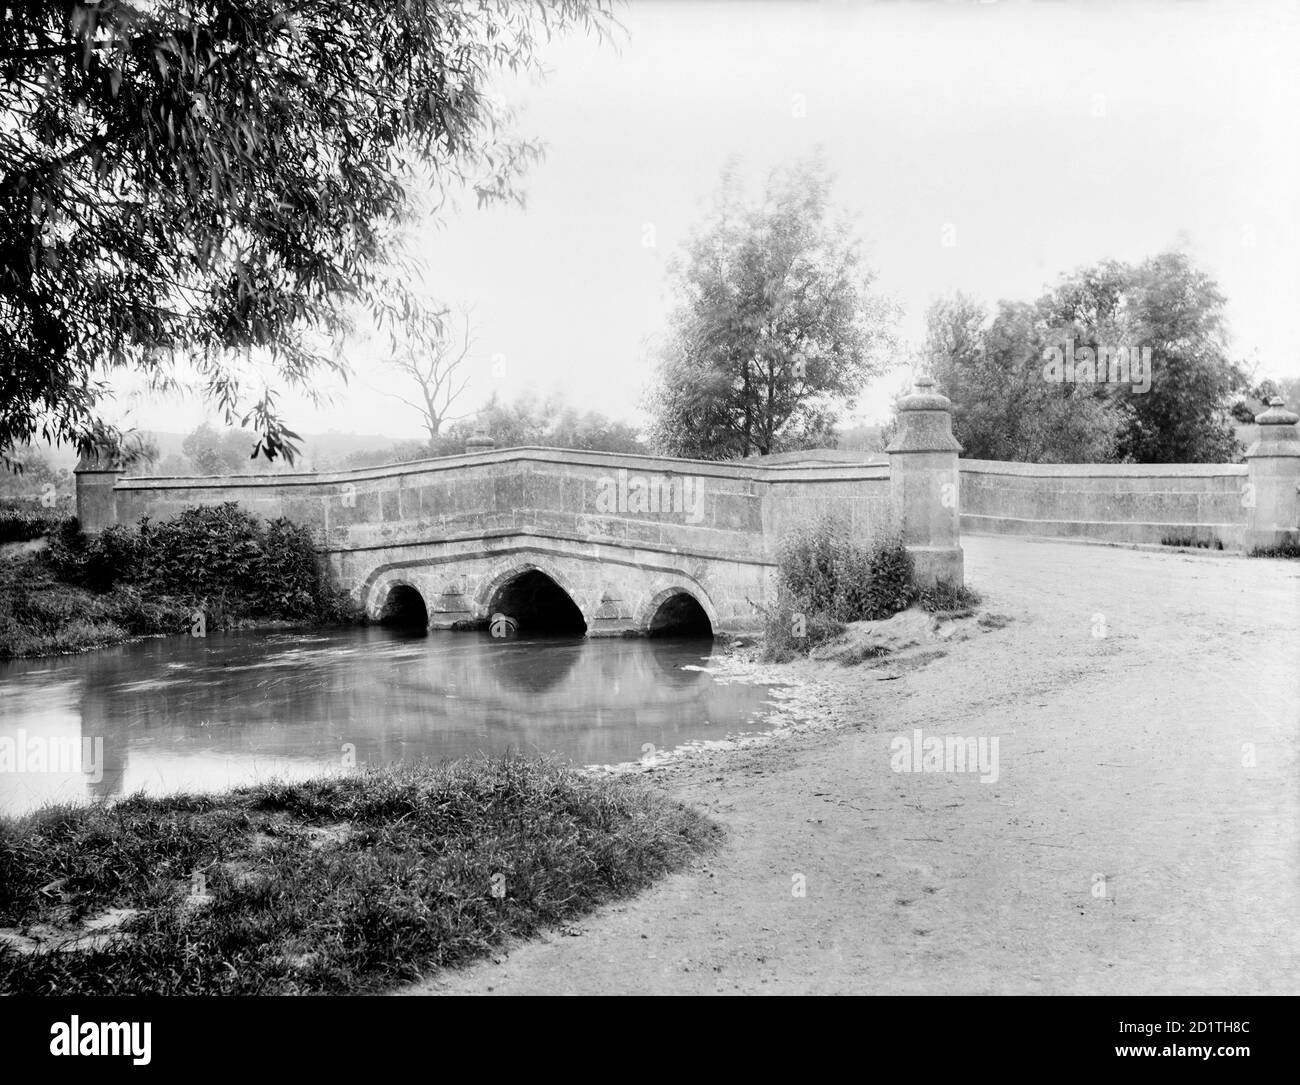 BOURTON BRIDGE, Bourton-on-the-Water, Gloucestershire. A picturesque Cotswold scene showing the bridge over the river Windrush at a crossing point which has been in use since Roman times. Photographed by Henry Taunt in 1893. Stock Photo